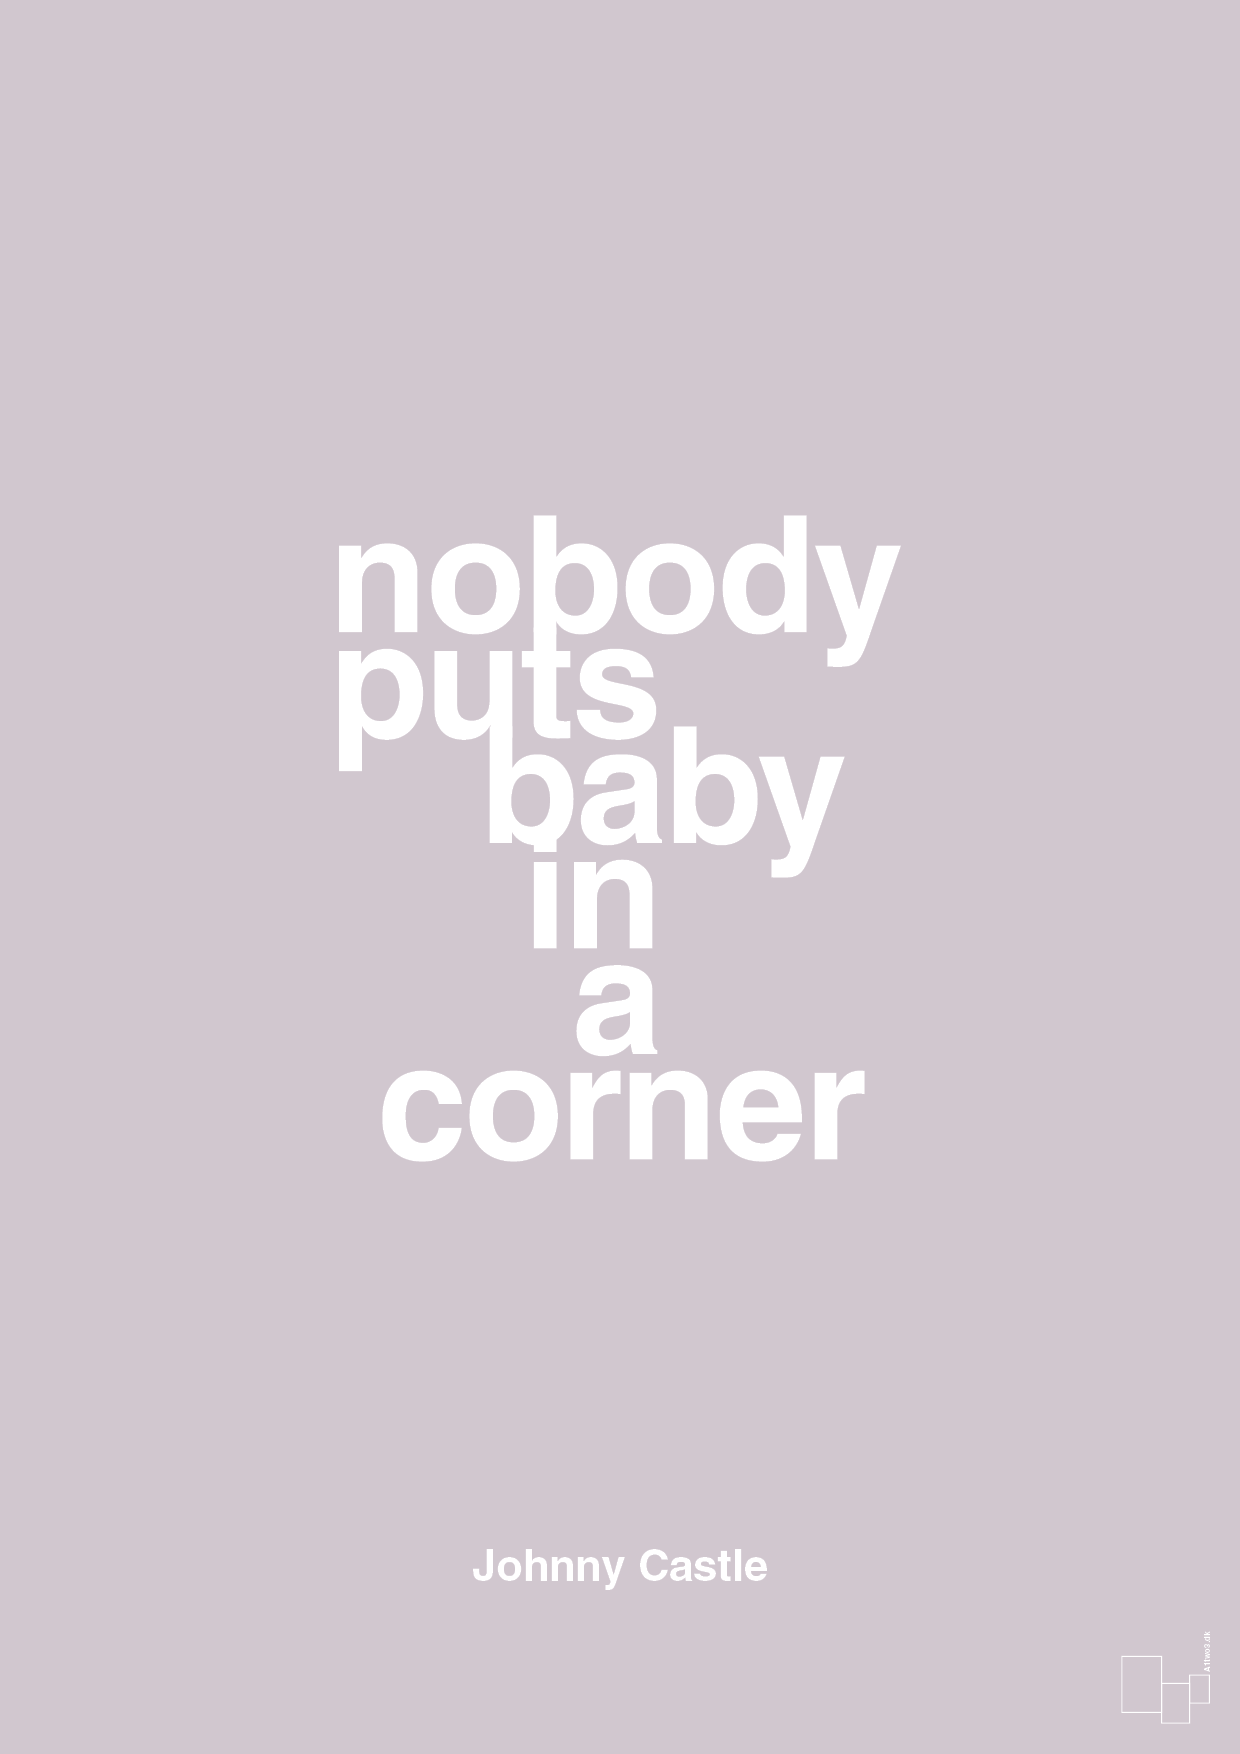 nobody puts baby in a corner - Plakat med Citater i Dusty Lilac